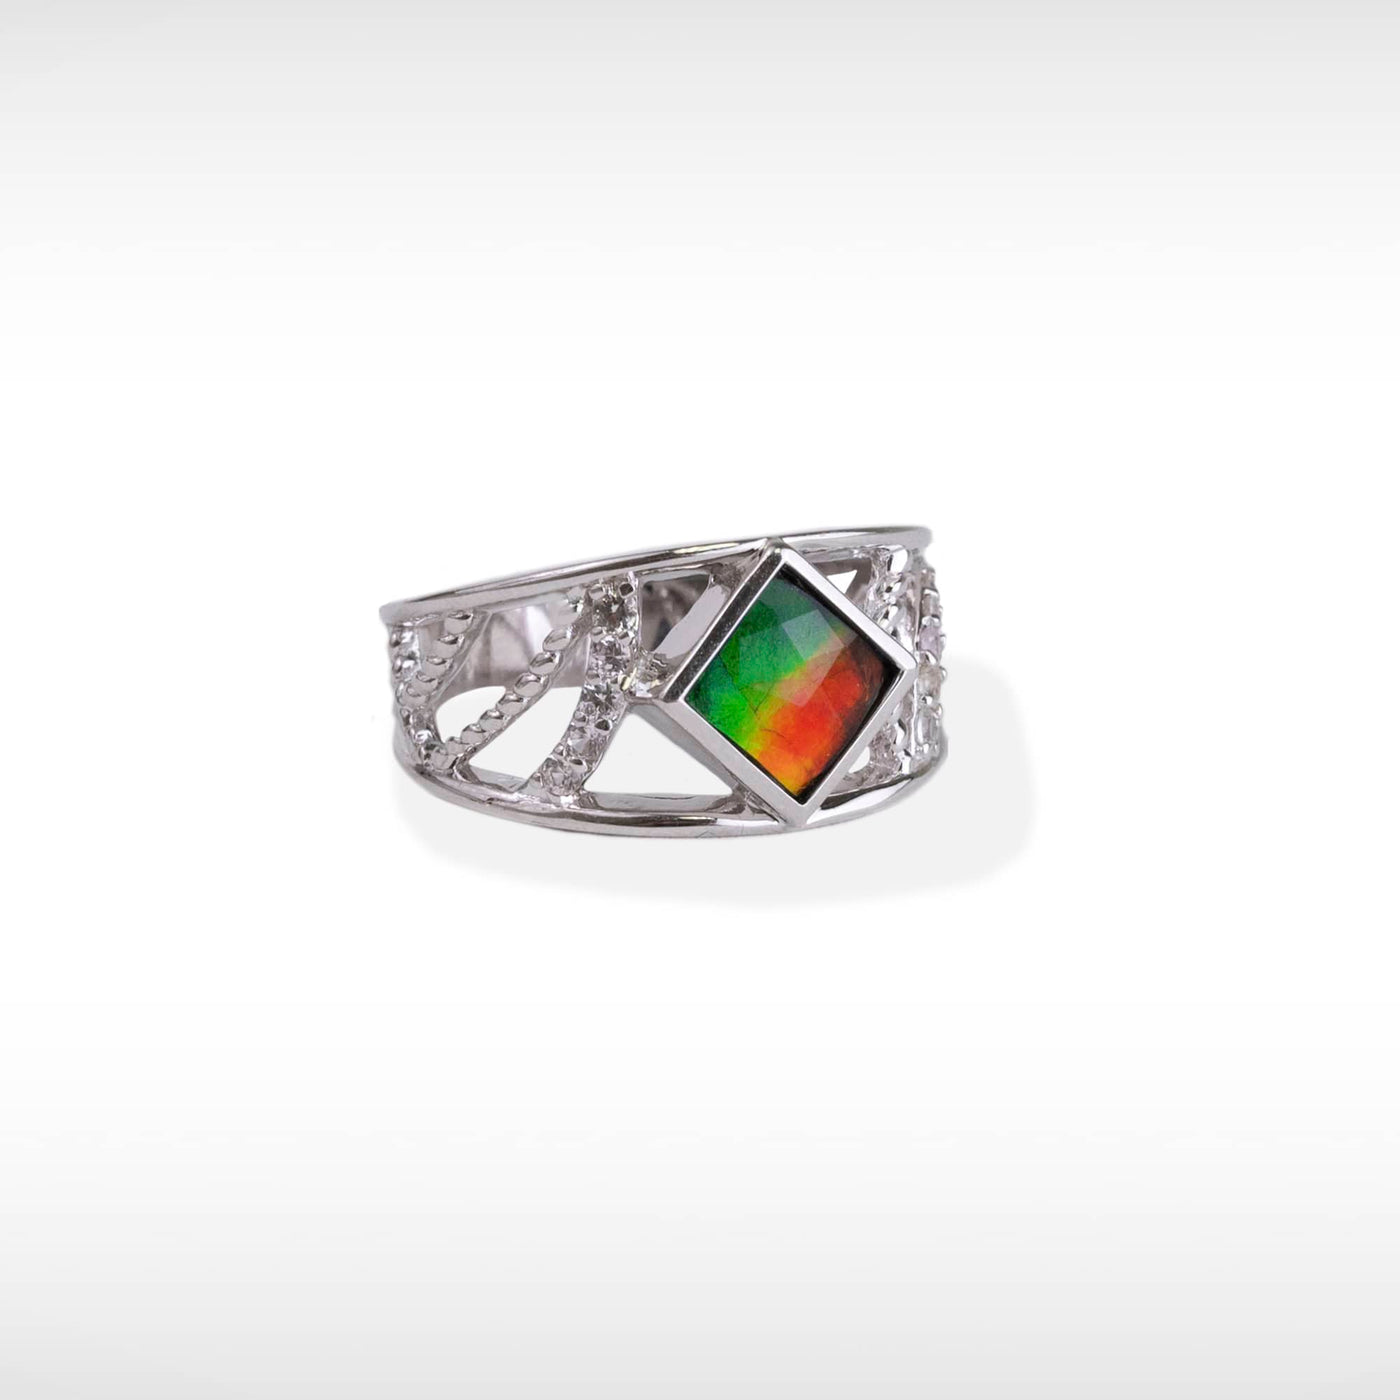 Women's Sterling Silver Ammolite Ring with white topaz accent